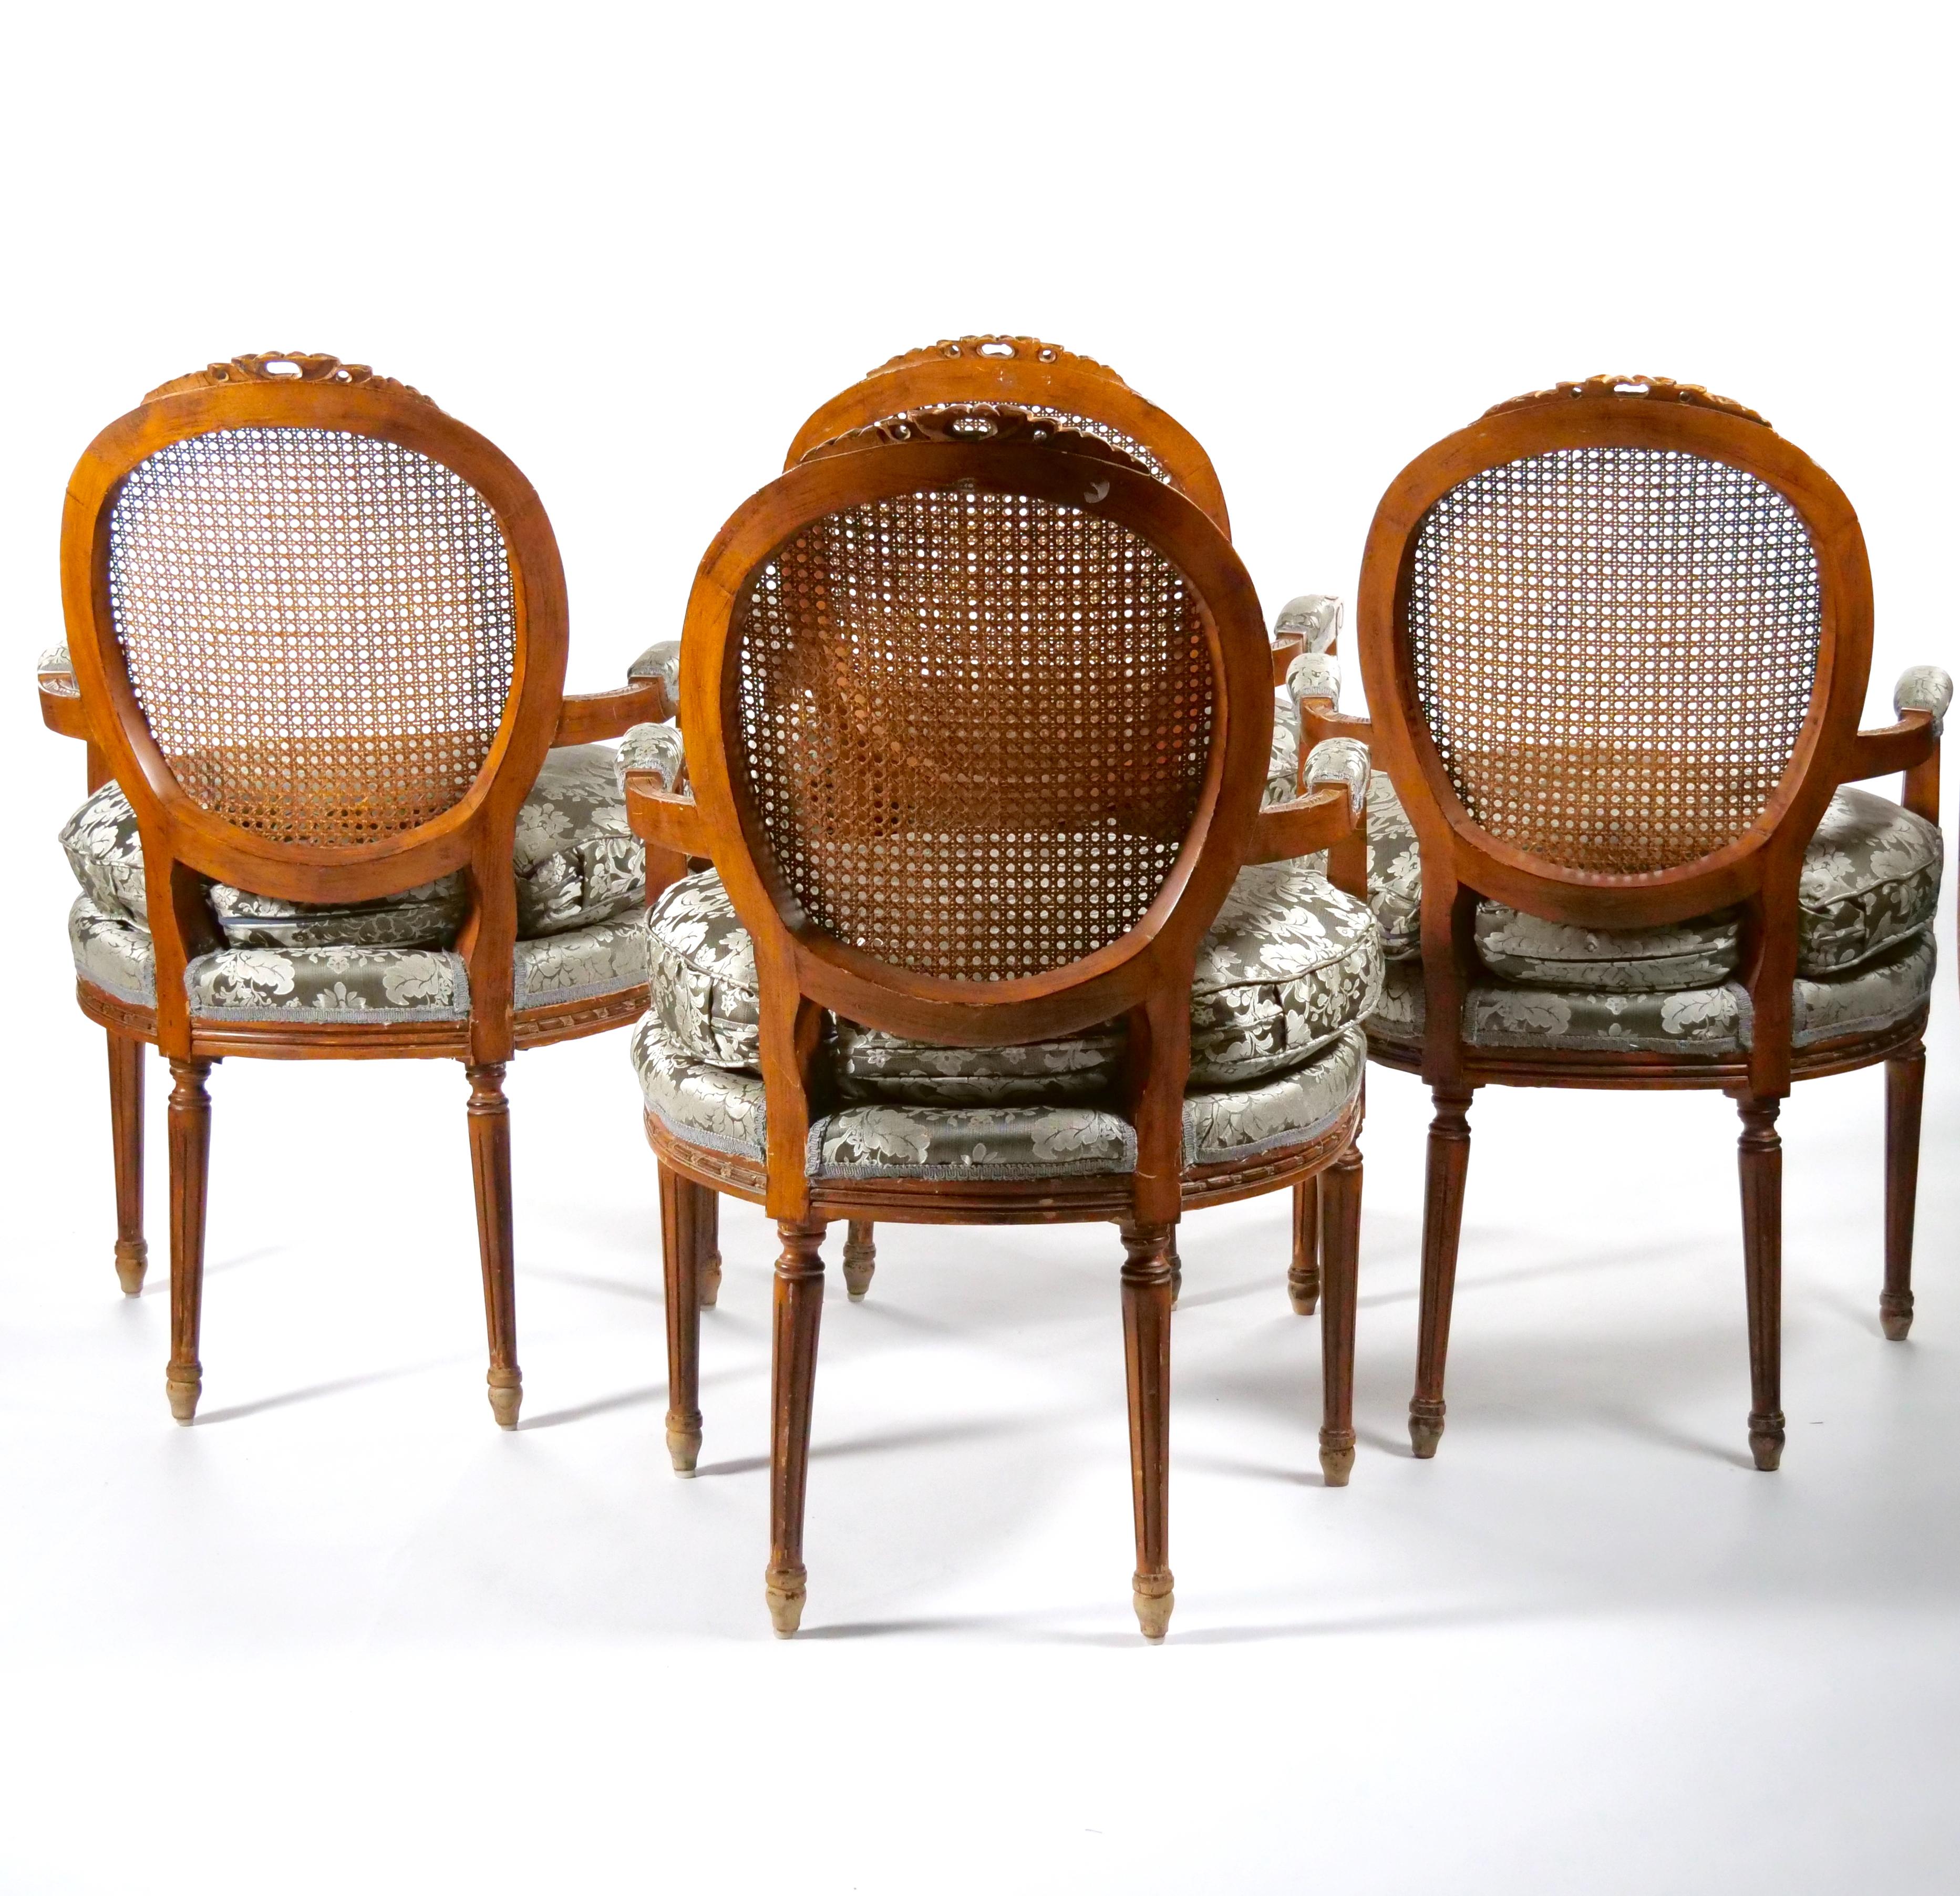 20th Century Louis XVI Style Walnut Caned Needlepoint Lounge Chairs For Sale